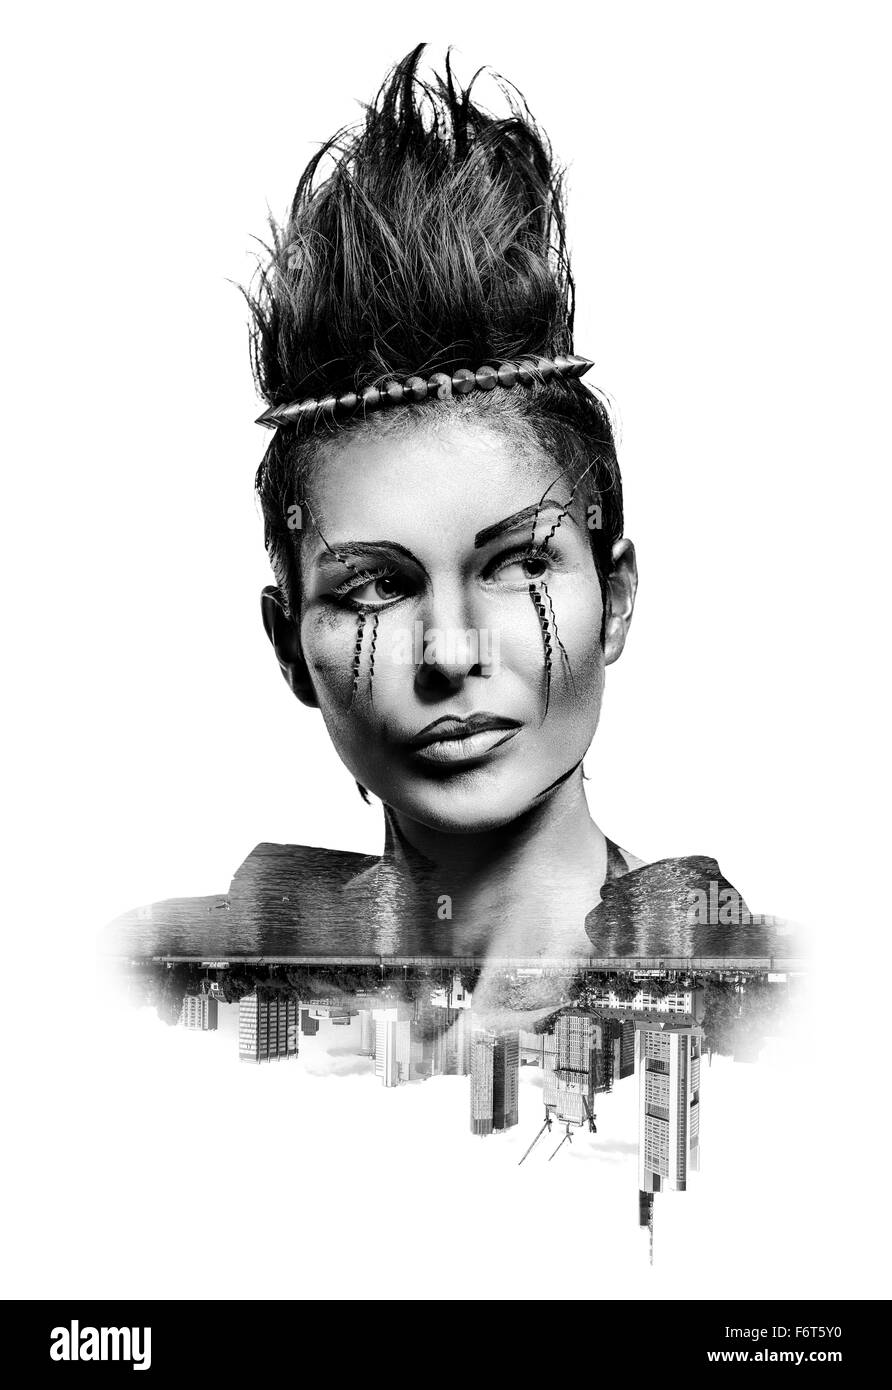 Double exposure of a woman with creative make-up and city skyscrapers Stock Photo